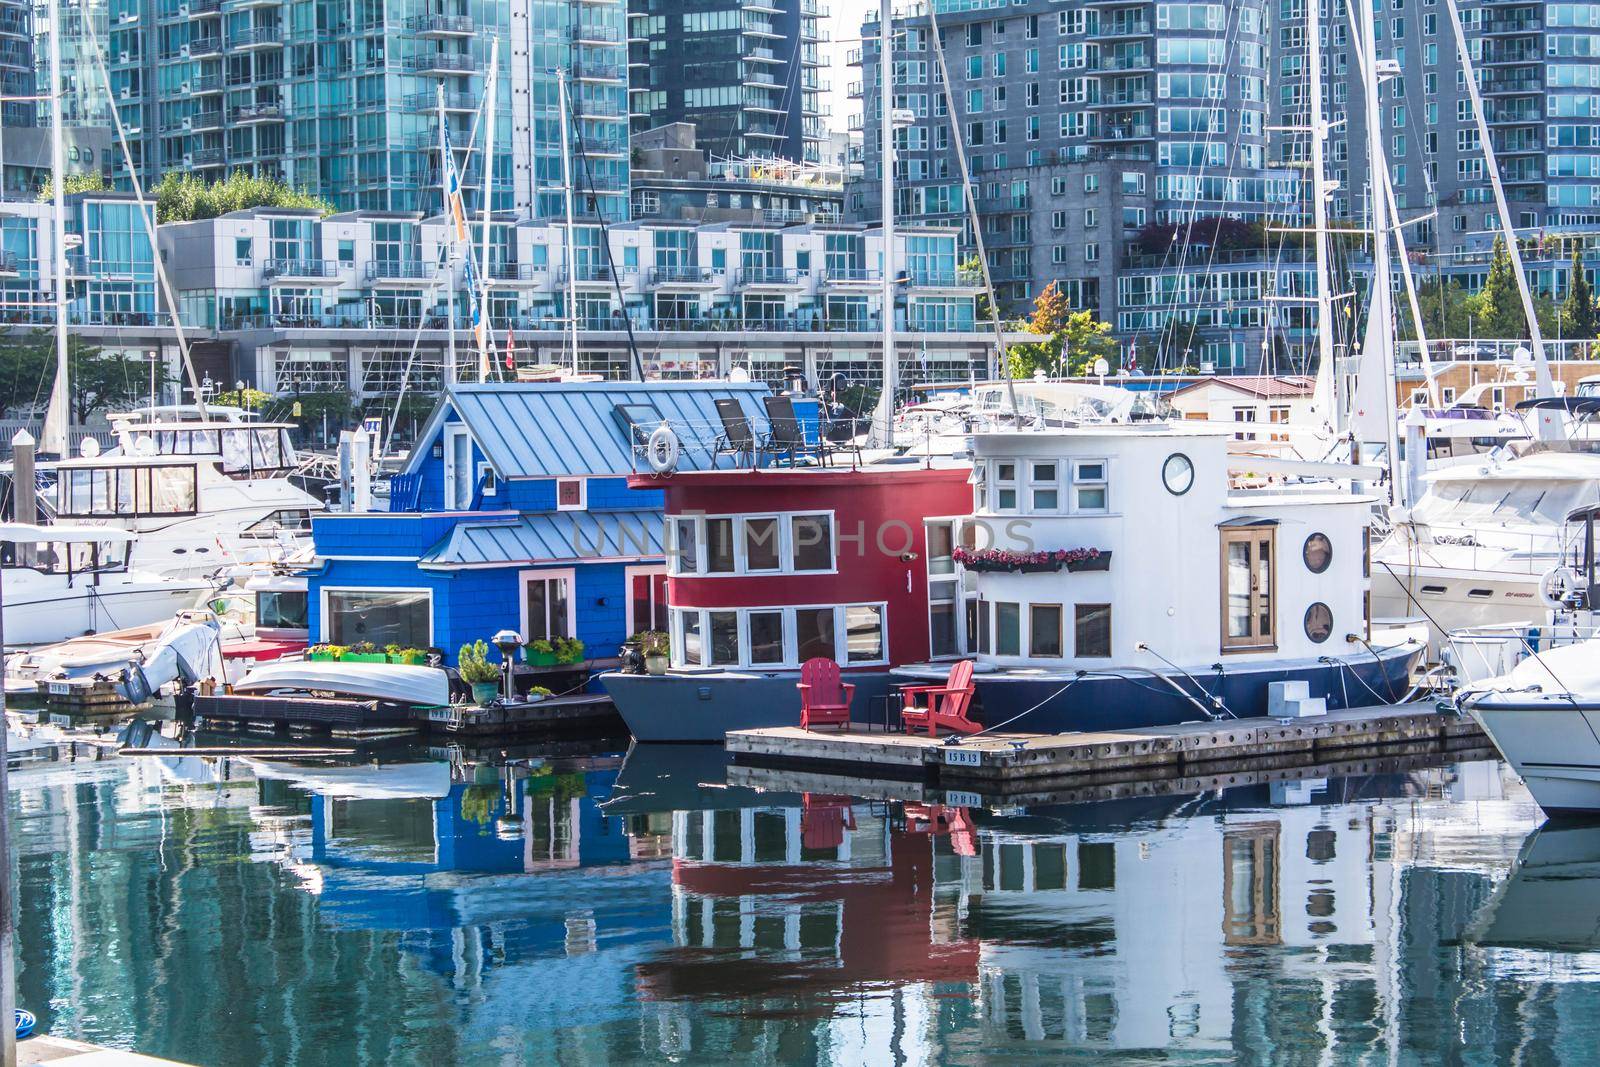 Houseboats docked in the marina at the Coal Harbour waterfront by JuliaDorian